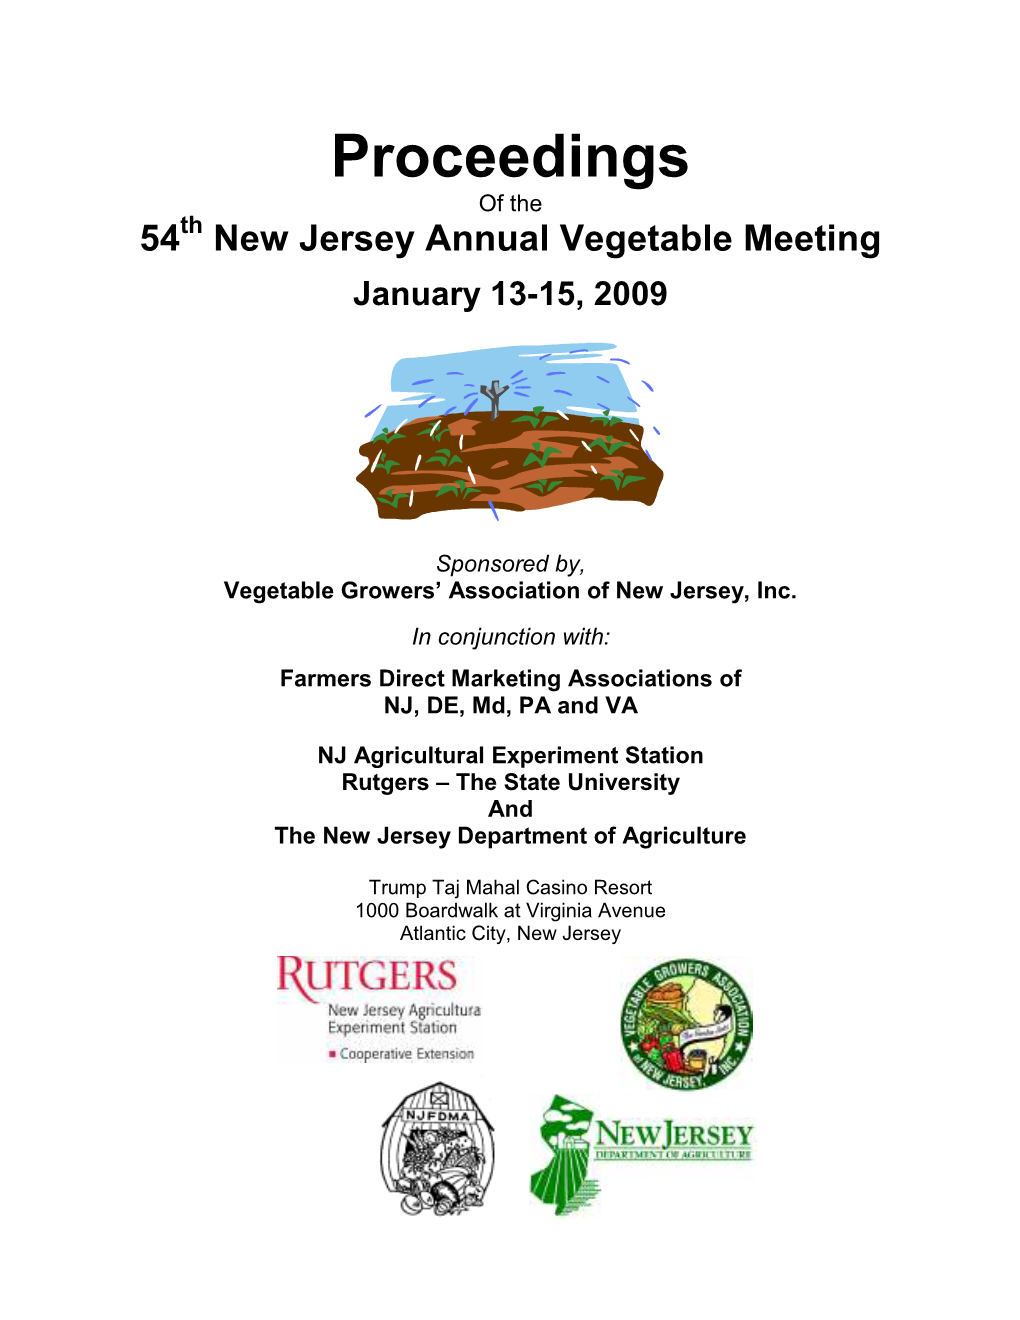 Proceedings of the 54Th New Jersey Annual Vegetable Meeting